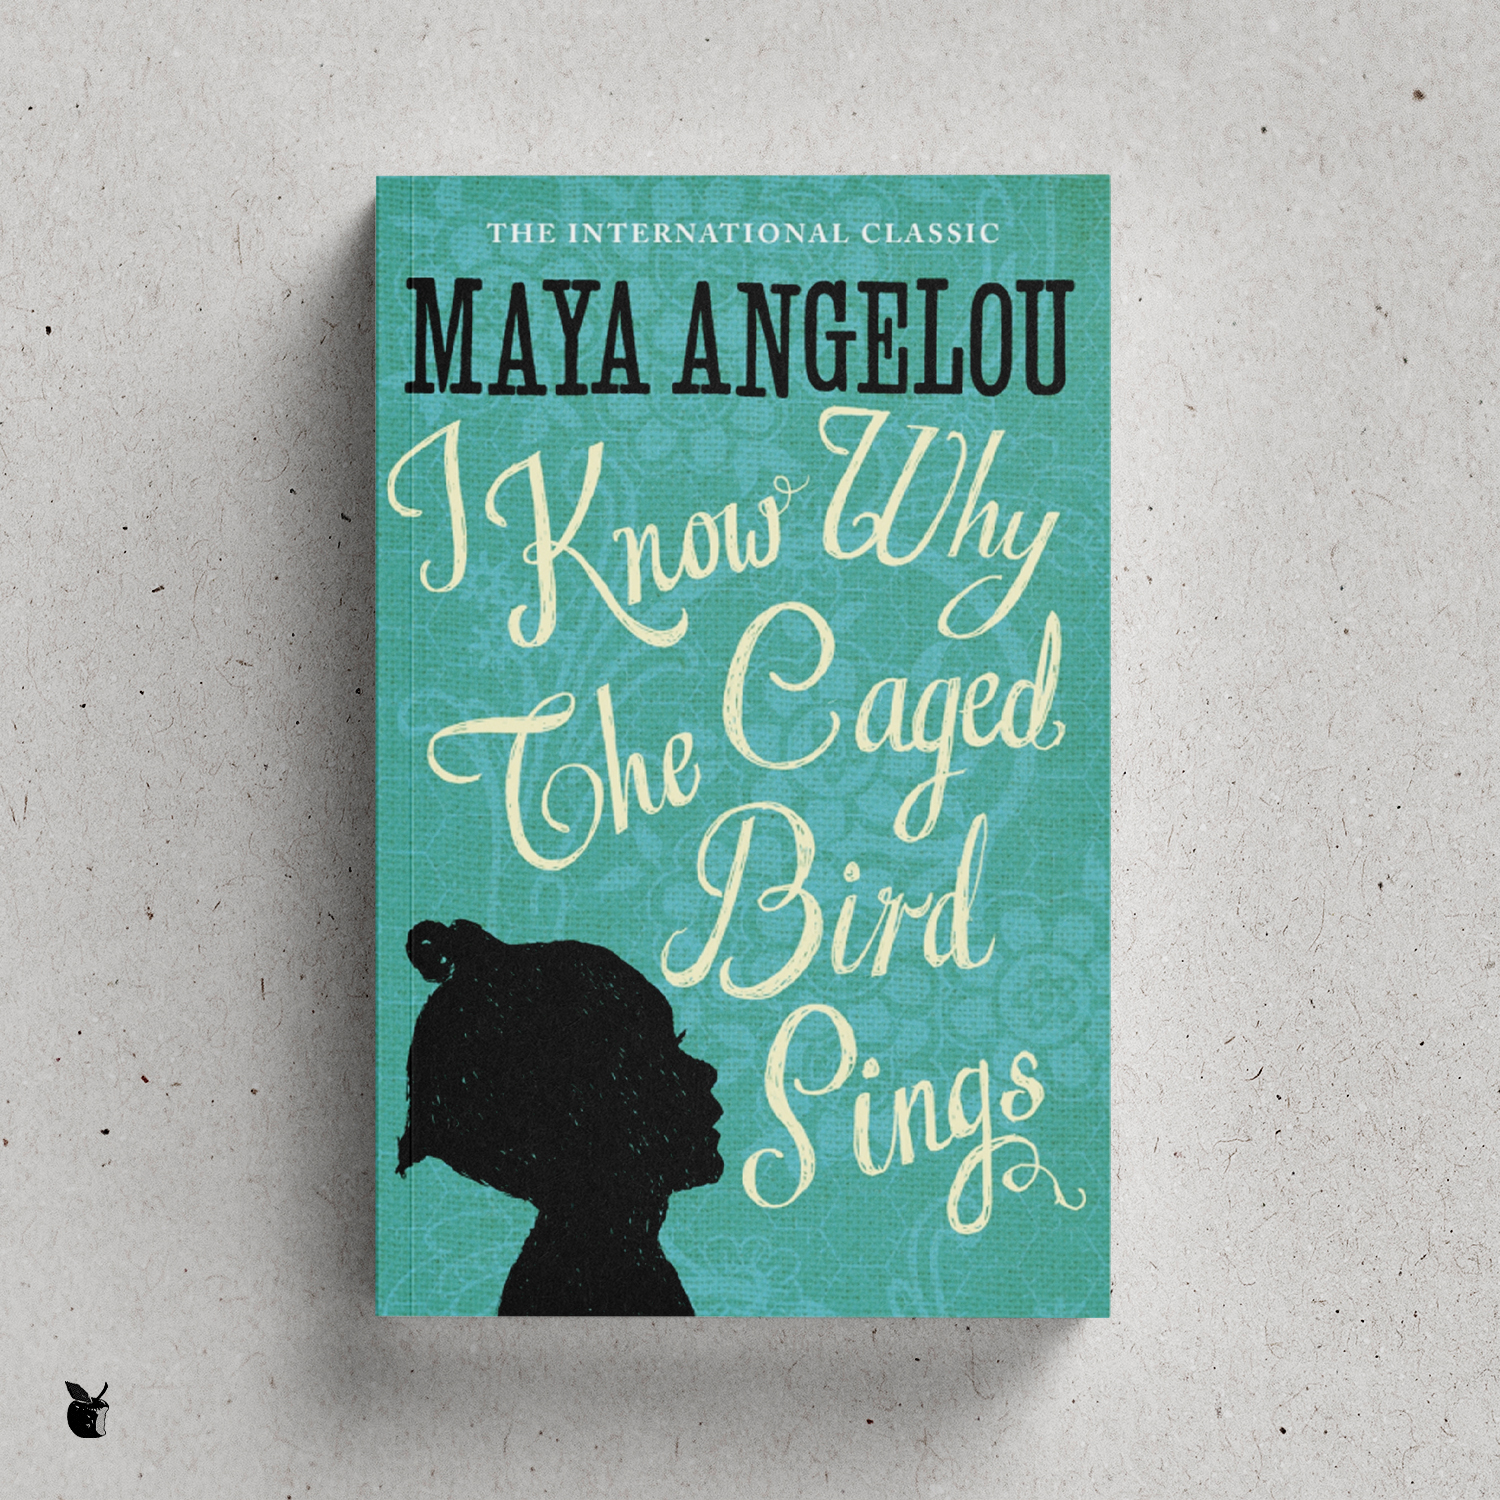 I Know why the Caged Bird Sings by Maya Angelou